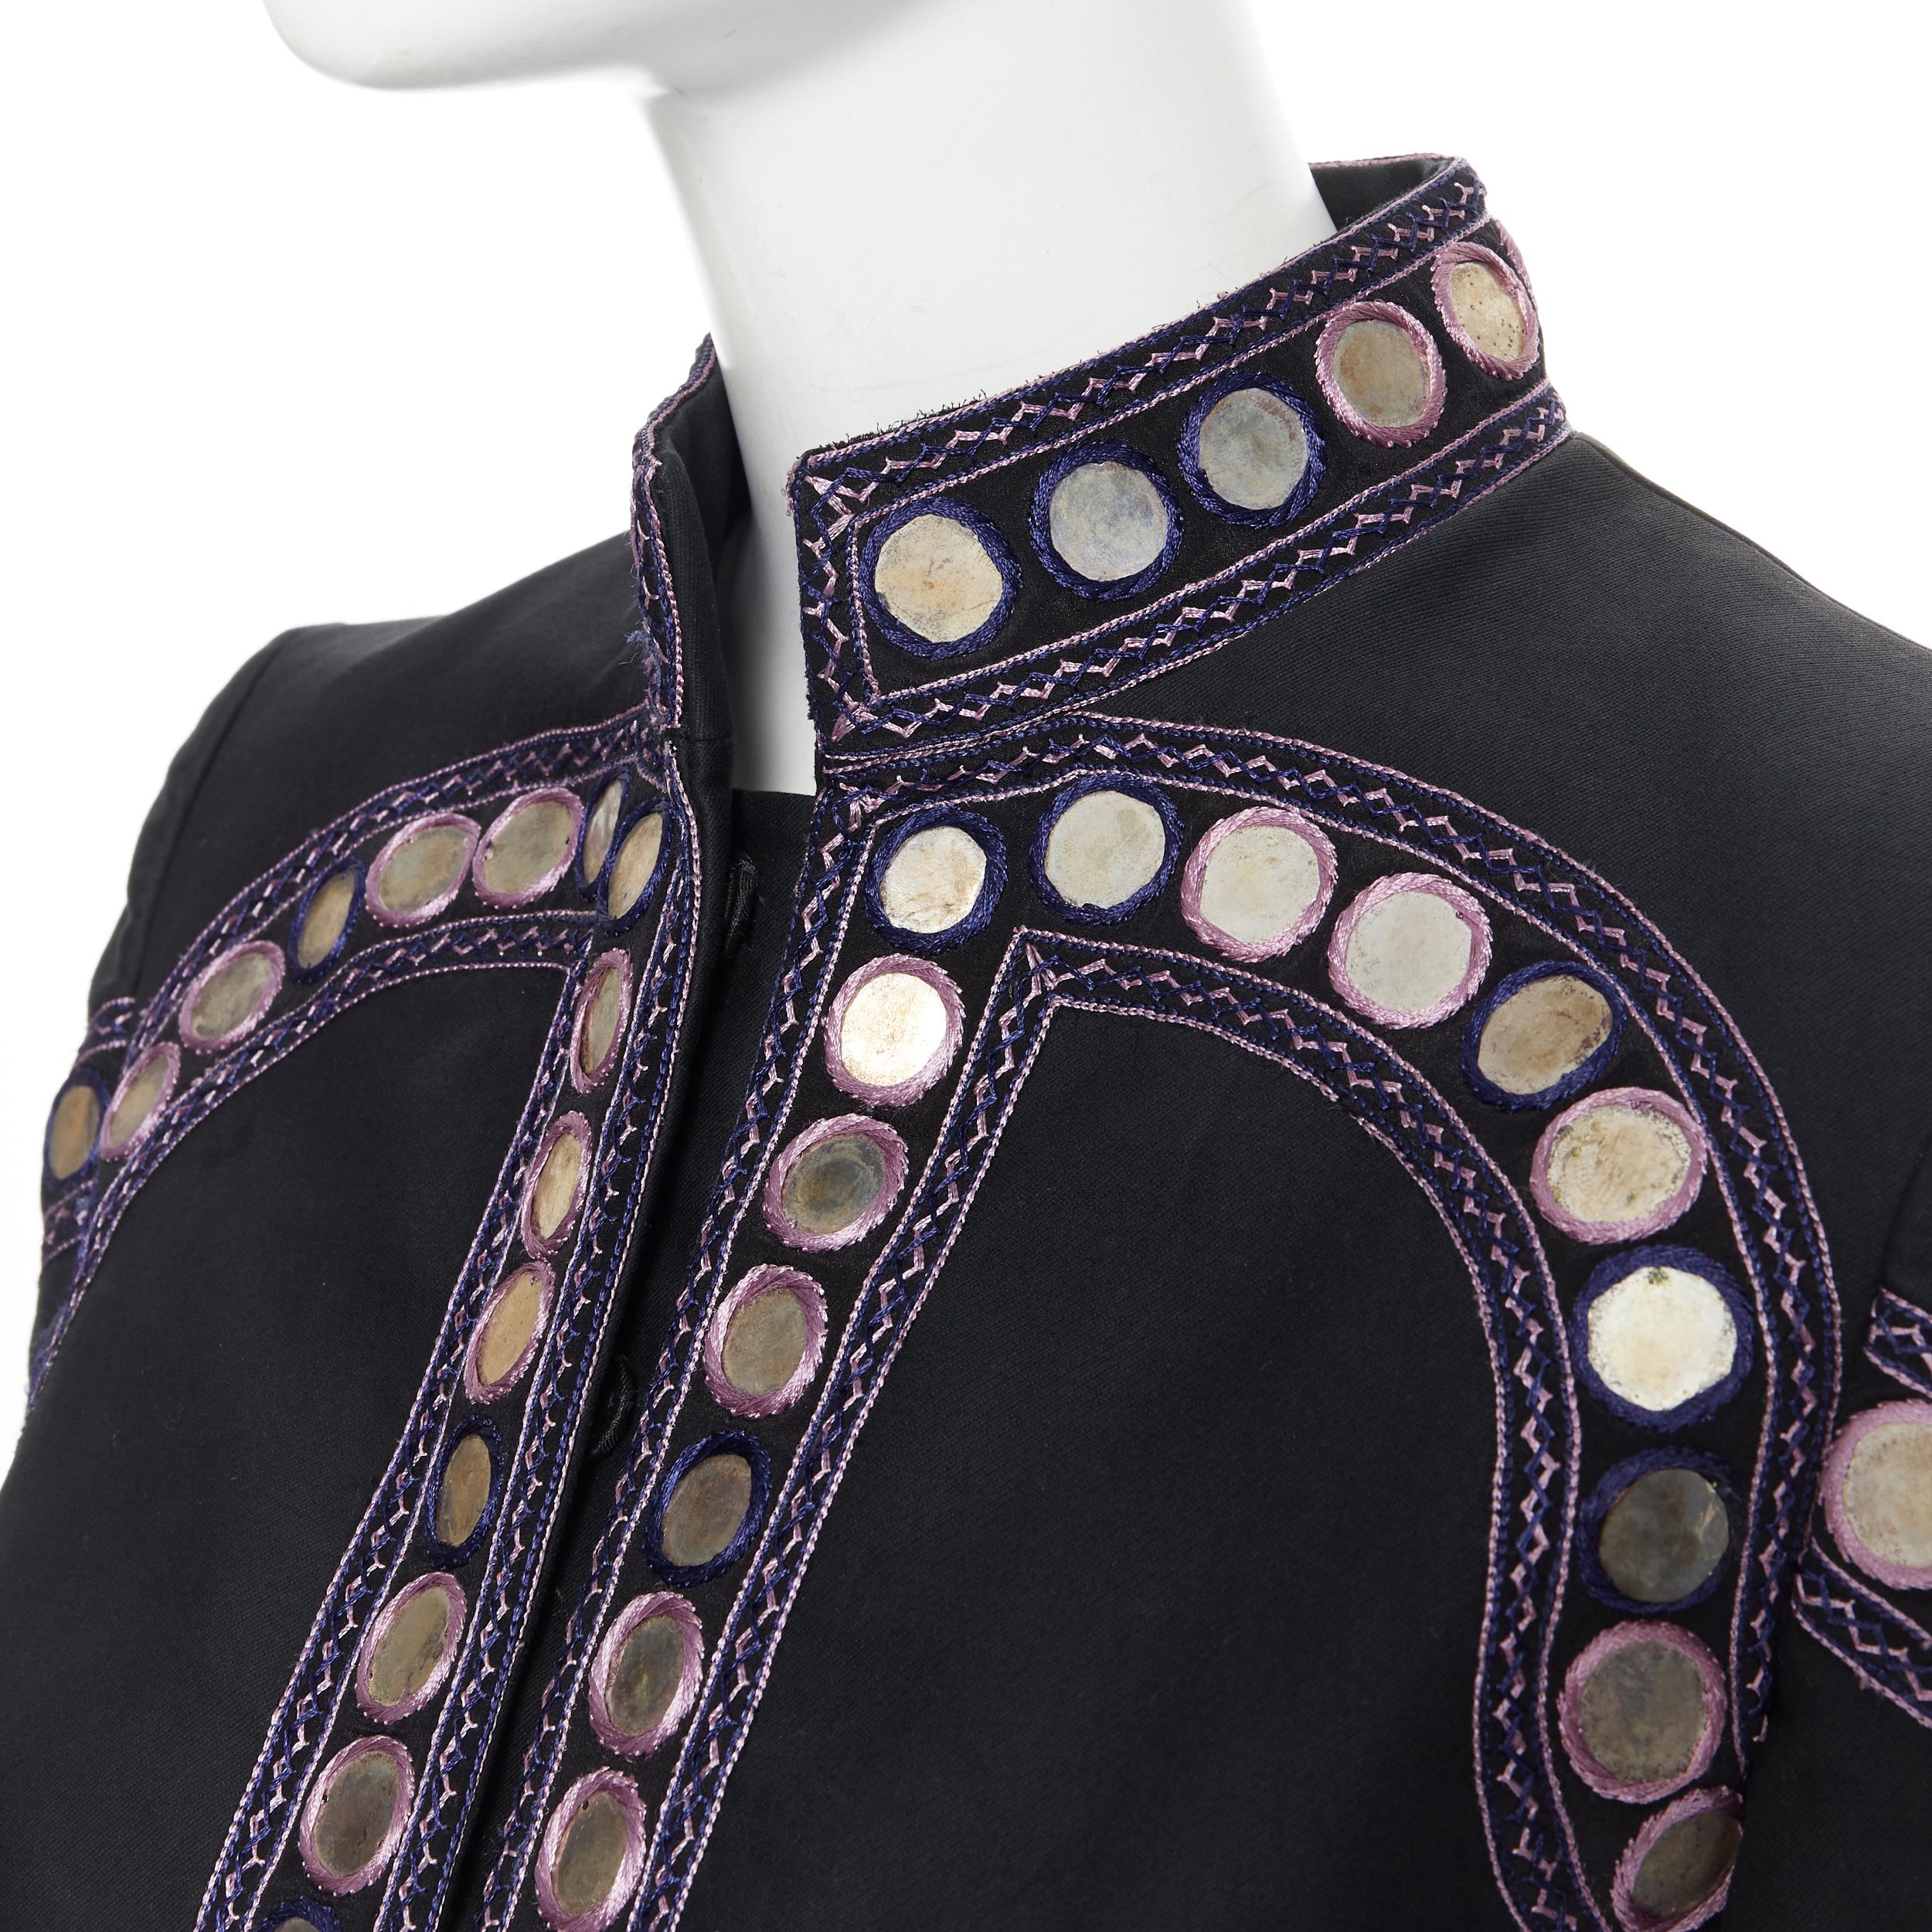 vintage ALEXANDER MCQUEEN 2004 black ethnic embellishment cropped jacket IT38 Reference: TGAS/A05723 
Brand: Alexander McQueen 
Designer: Alexander McQueen 
Collection: 2004 
Material: Cotton 
Color: Black 
Pattern: Abstract 
Closure: Snap 
Extra